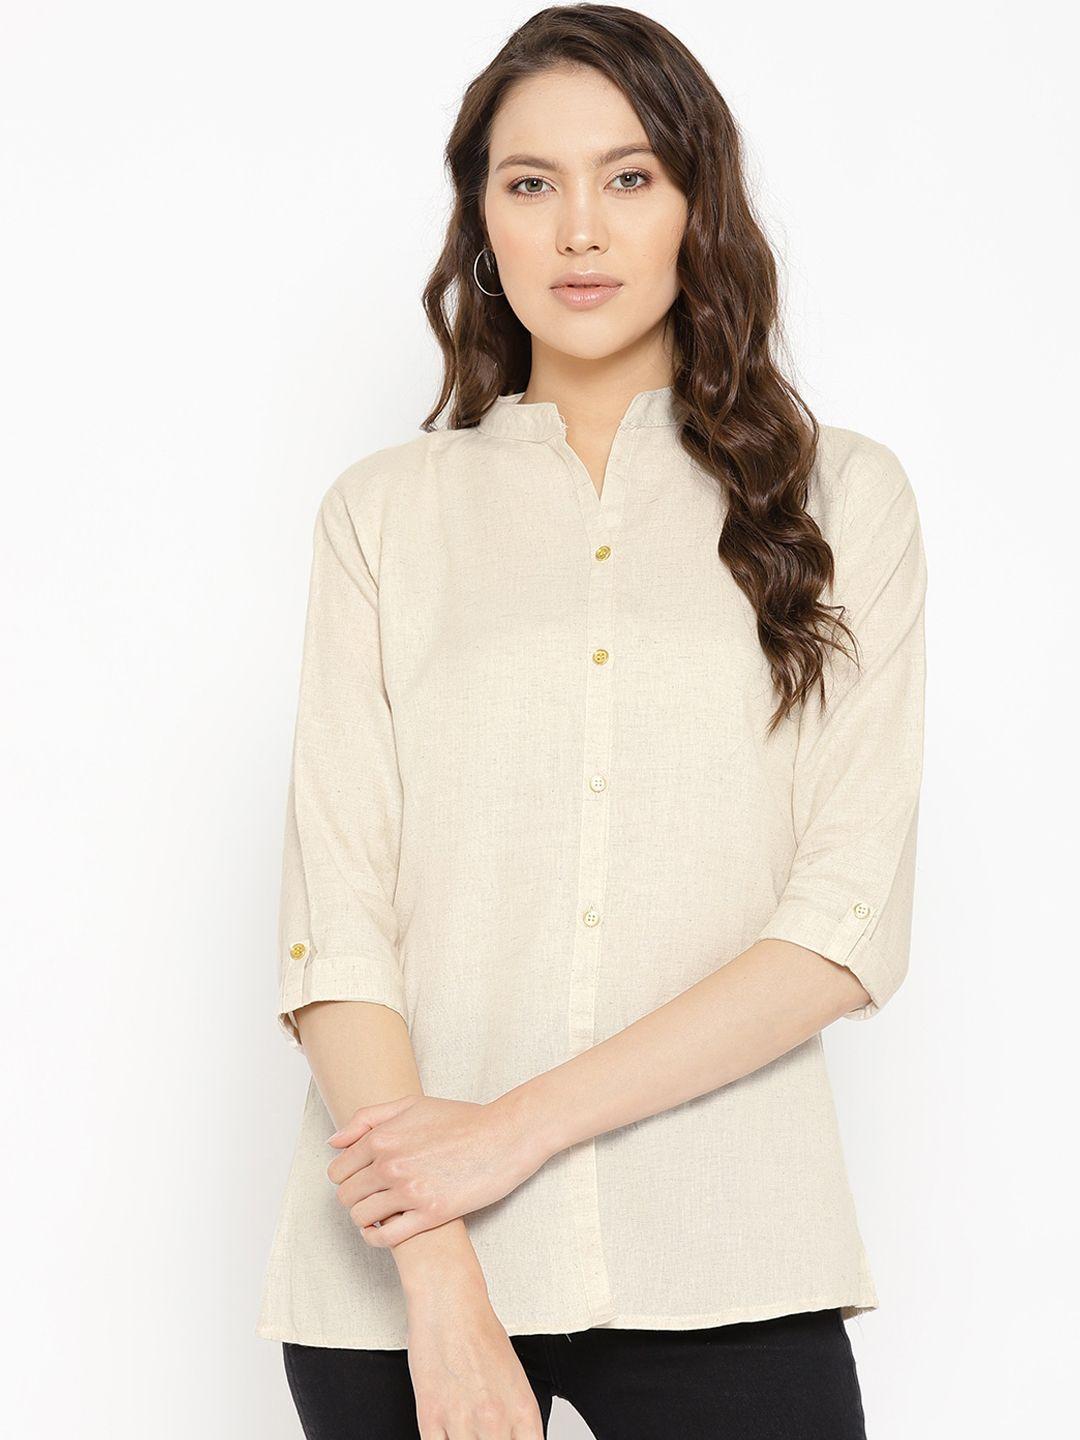 vastraa fusion women off-white solid pure cotton shirt style top